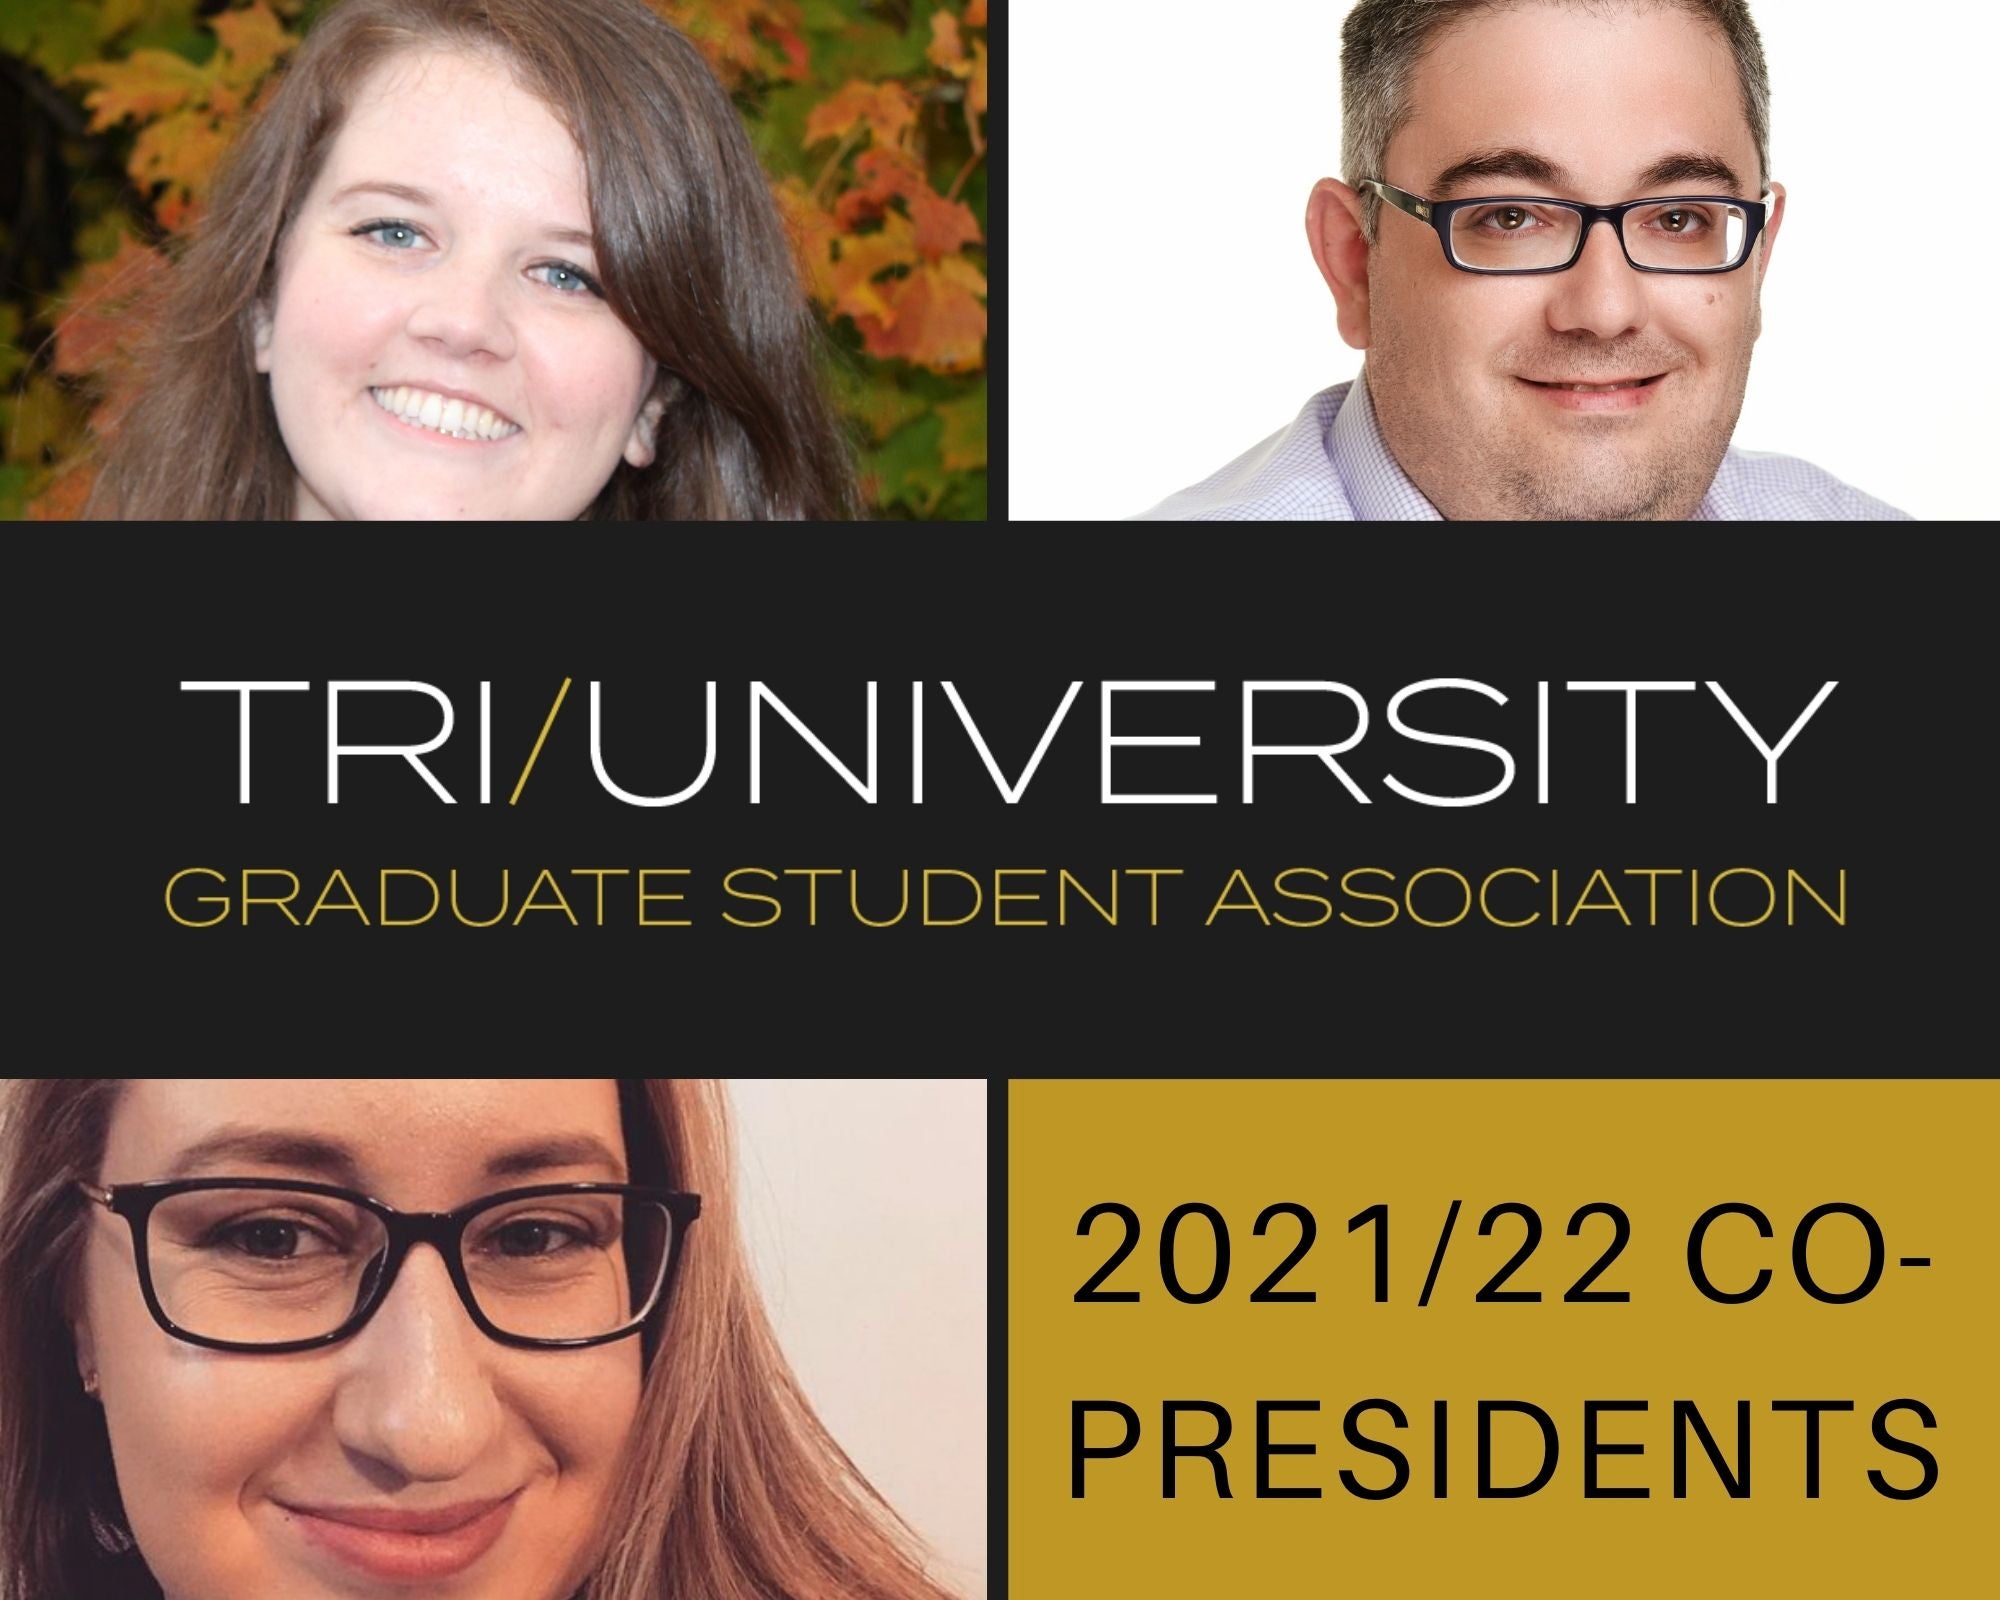 Collage of Tri-U co-presidents with text in middle "Tri-University Graduate Students Association" and "2021-22 Co-presidents"